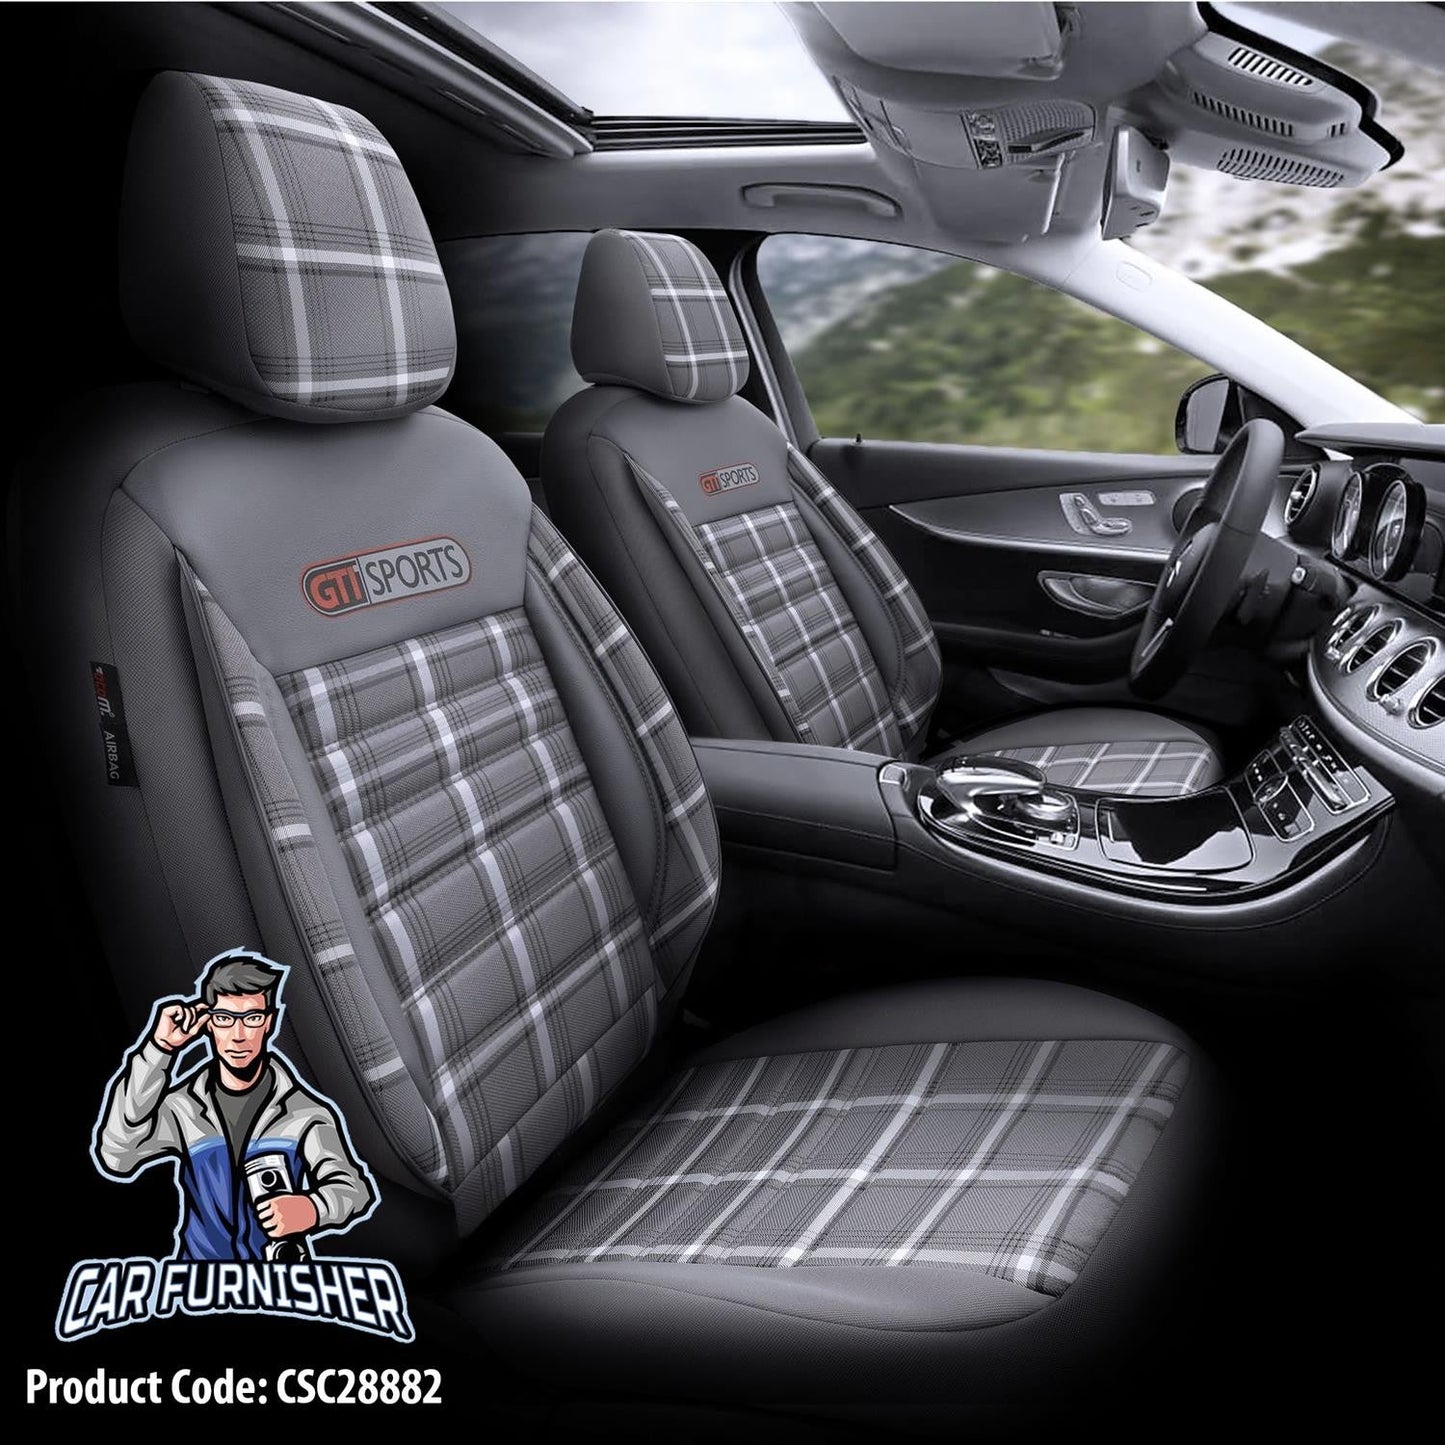 VW Golf GTI Car Seat Covers MK4/MK5/MK6/MK7 1998-2020 Special Series Gray 5 Seats + Headrests (Full Set) Leather & Fabric